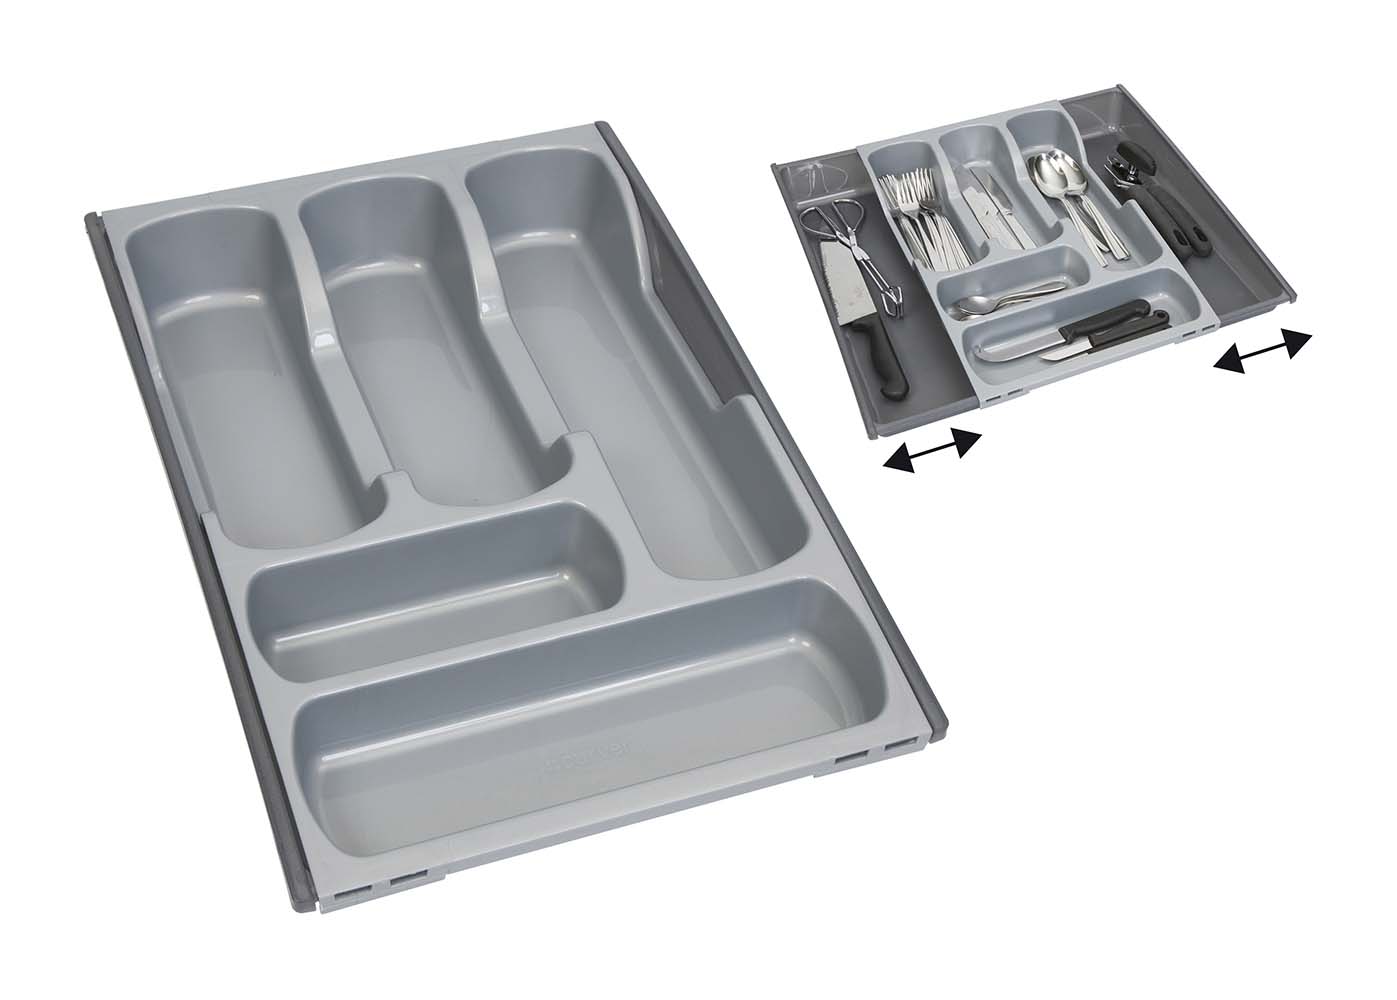 6302102 A very practical 7-compartment cutlery tray. This cutlery tray can be adjusted to the space by sliding the sides in and out. By sliding out the sides of this 5-compartment cutlery tray outward, 2 additional compartments are created. Ideal to store items compactly.